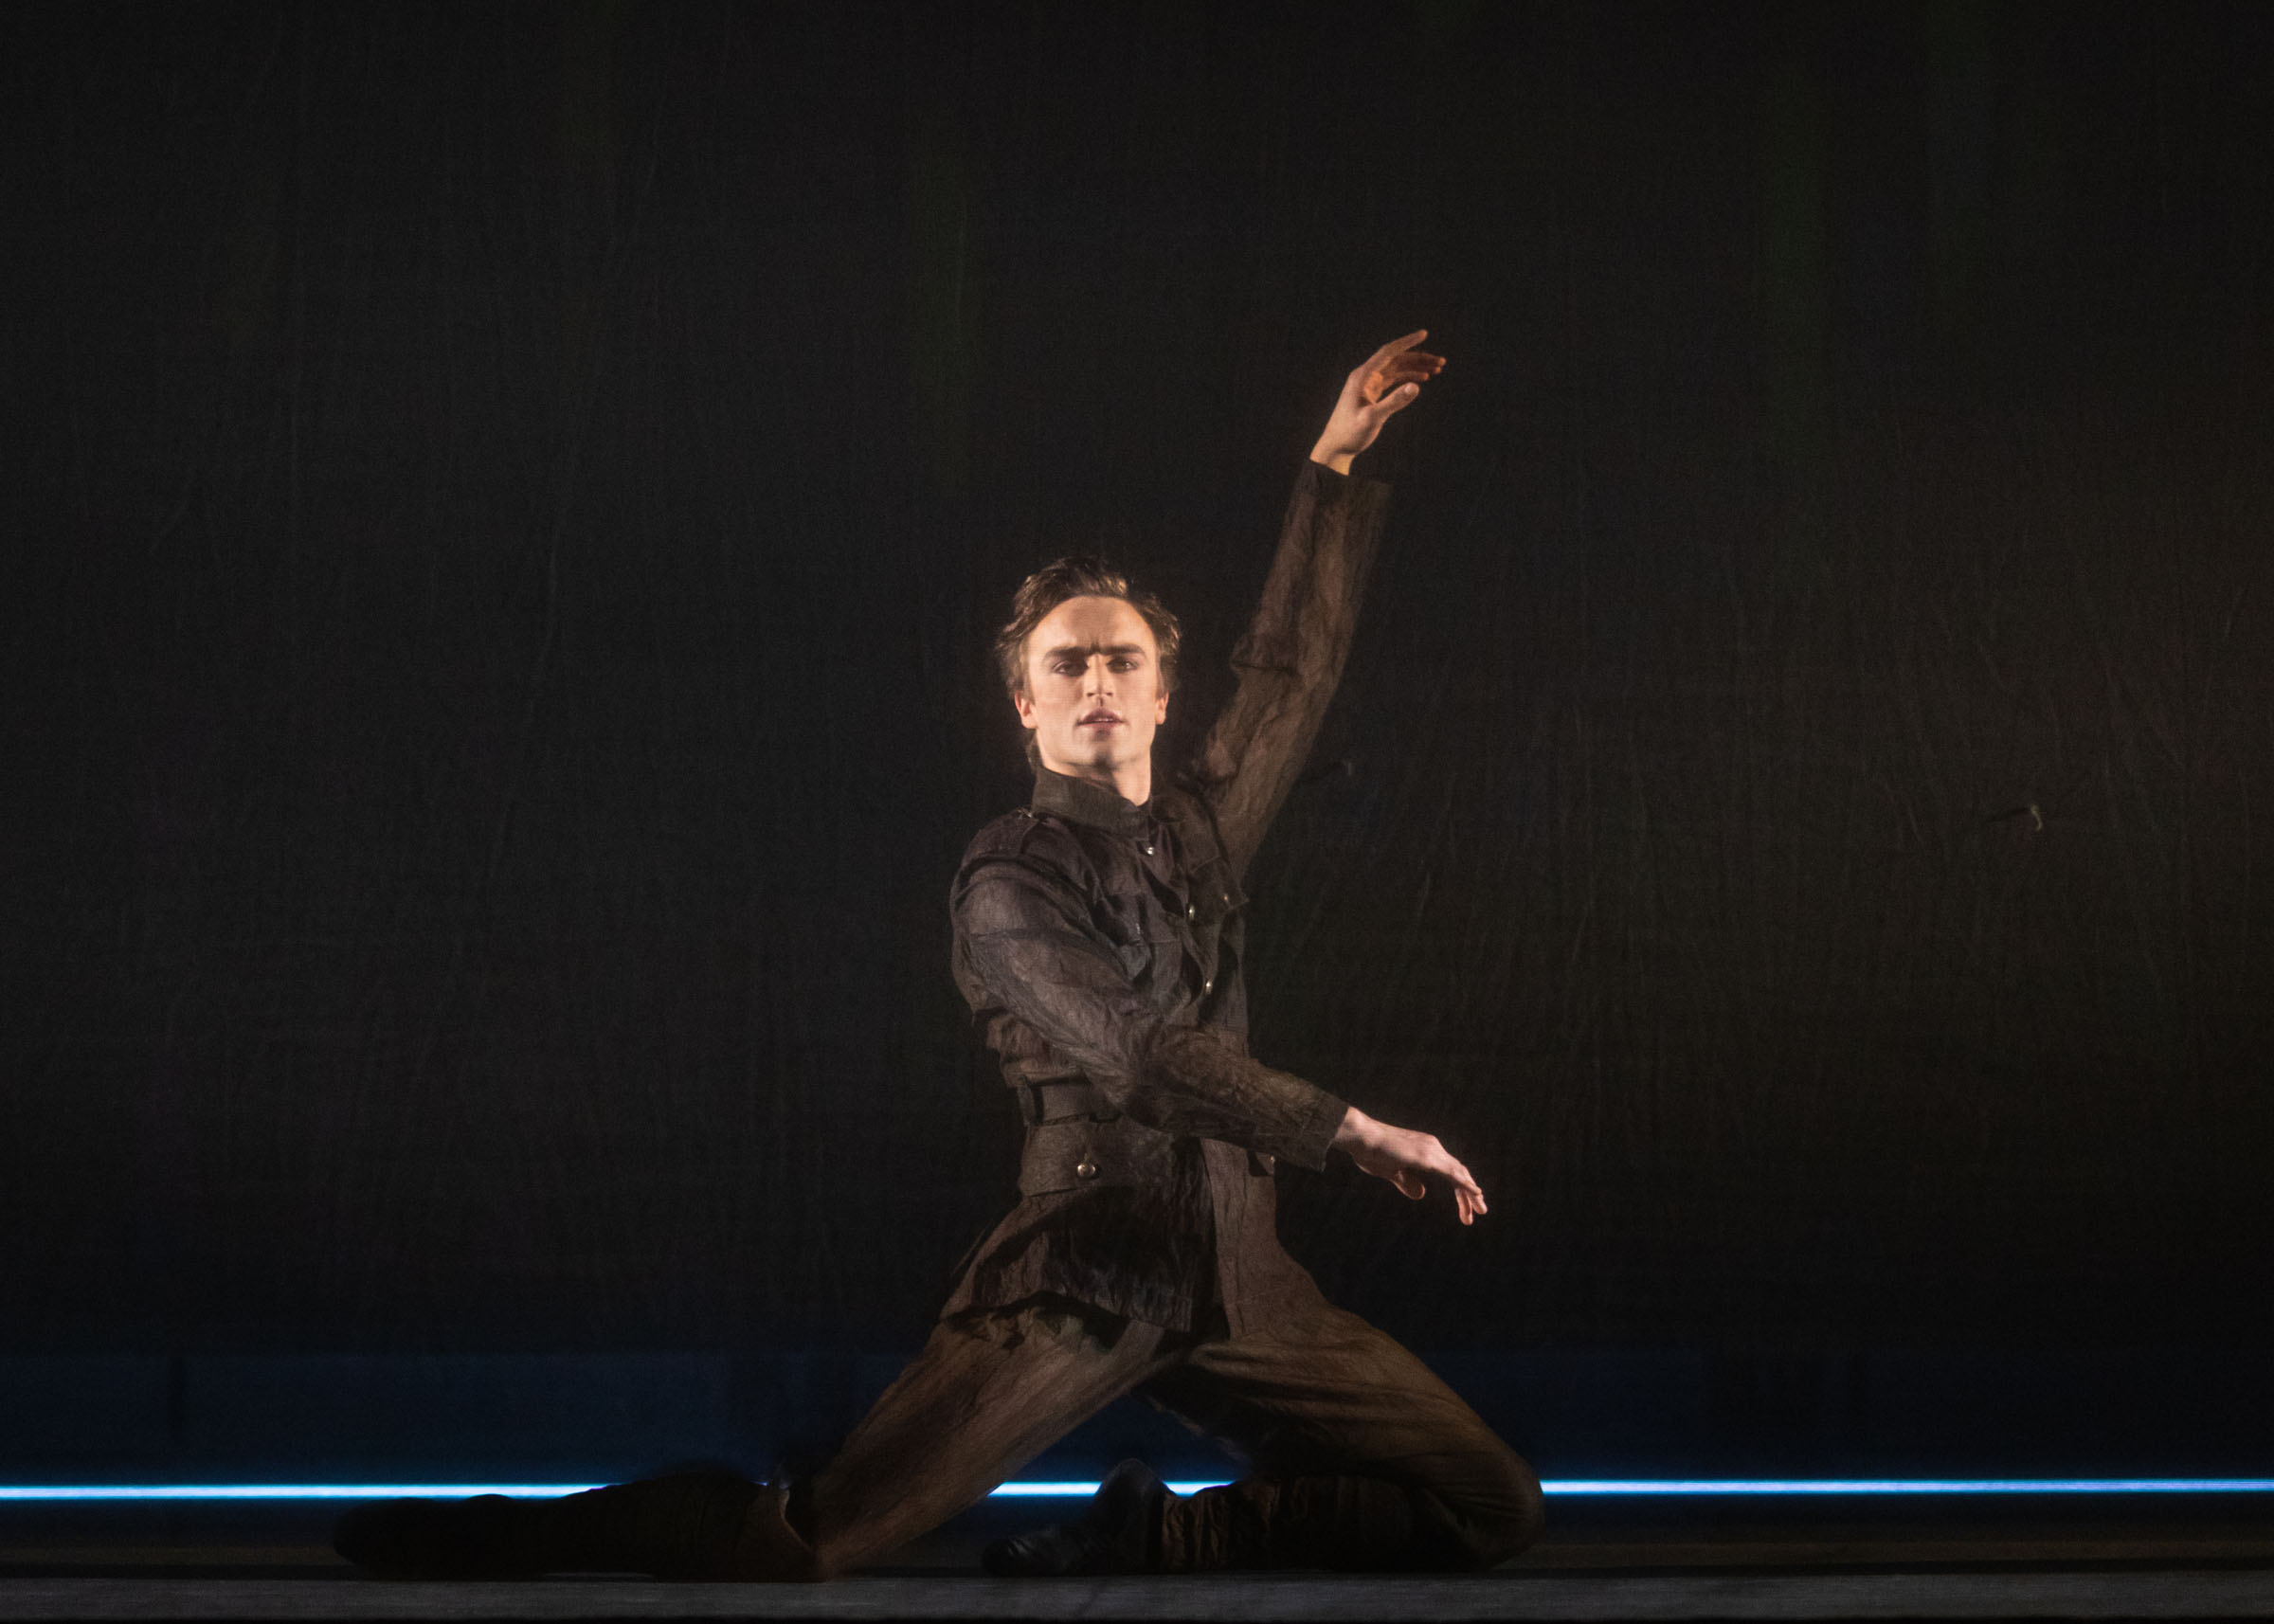 Matthew Ball as Ted Feltham in Alastair Marriott's The Unknown Soldier, The Royal Ballet